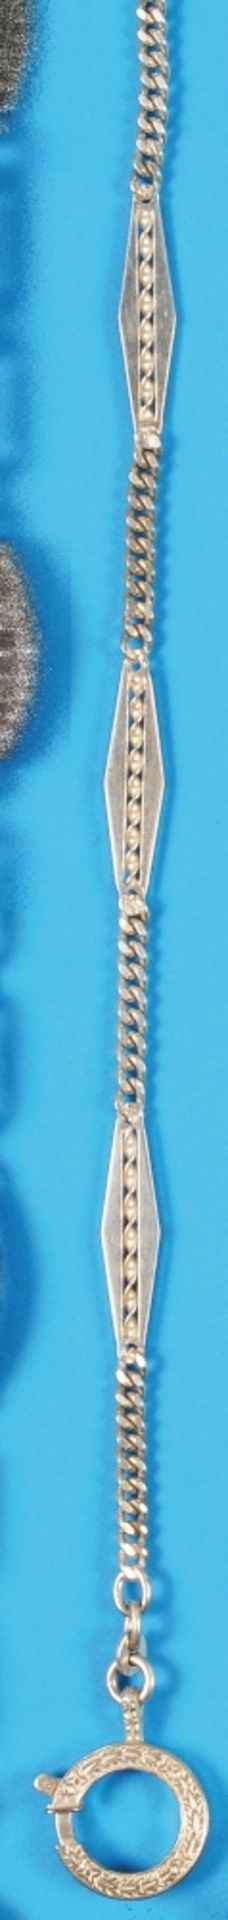 Silver tailcoat watch chain